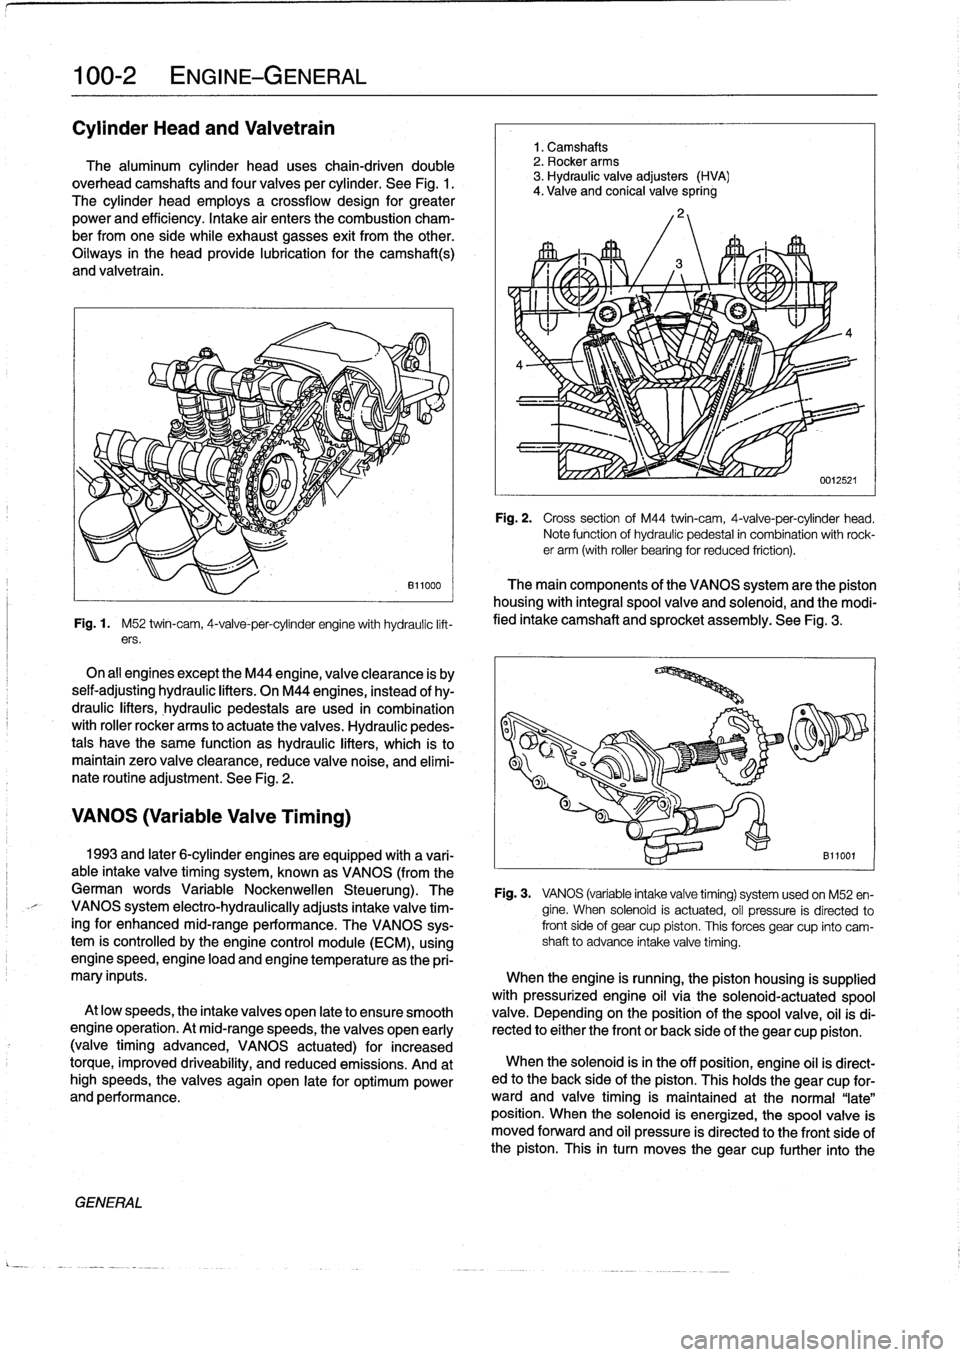 BMW 328i 1994 E36 Owners Manual 
100-2
ENGINE-GENERAL

Cylinder
Head
and
Valvetrain

The
aluminum
cylinder
head
uses
chain-driven
double
overhead
camshafts
and
four
valves
per
cylinder
.
See
Fig
.
1
.

The
cylinder
head
employs
a
cr